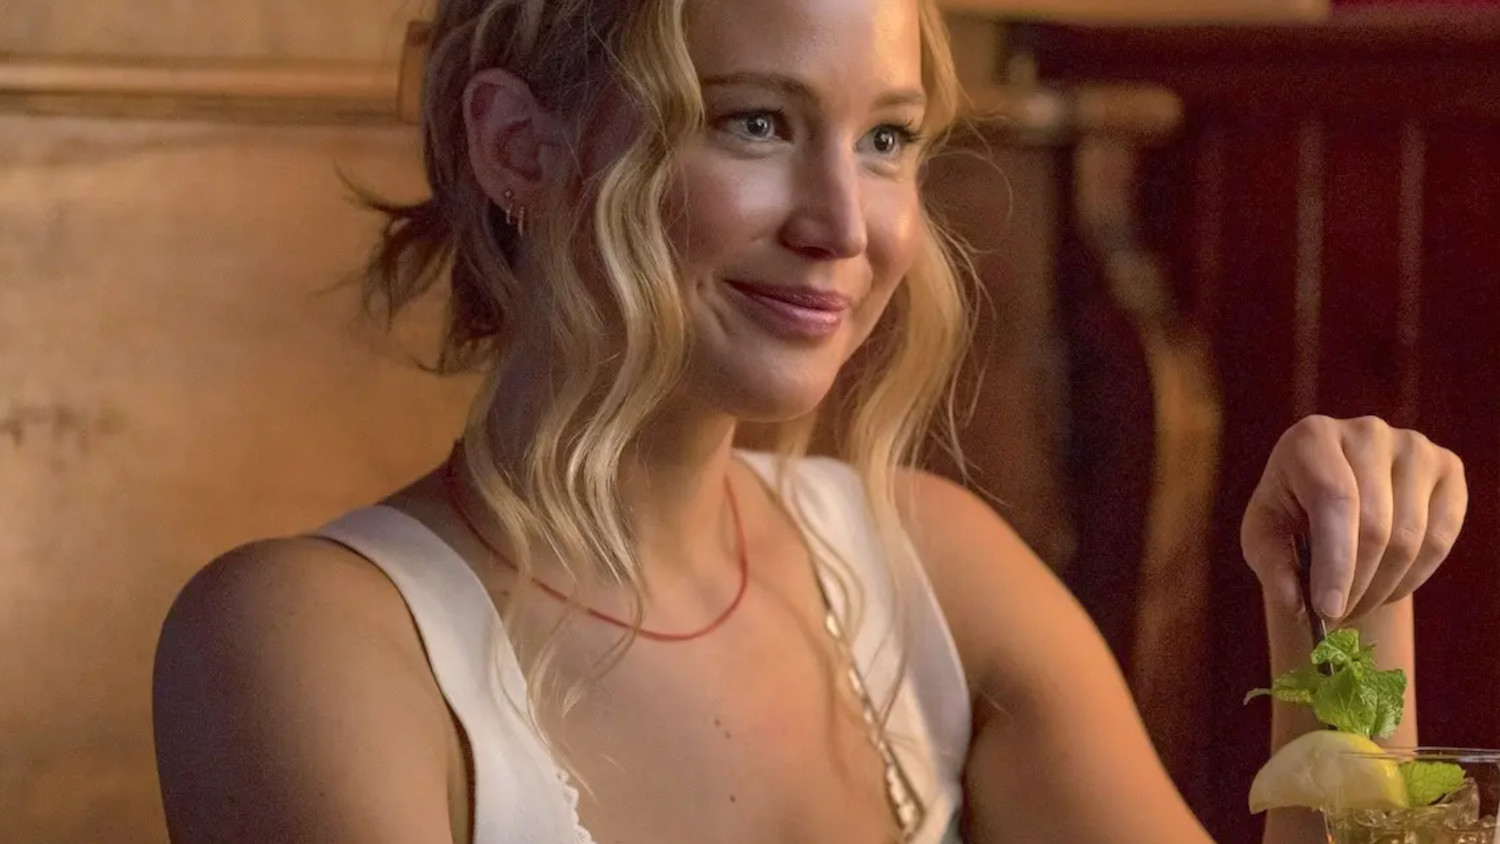 Jennifer Lawrence Returning To Comic Book Movies With ‘Why Don’t You Love Me?’